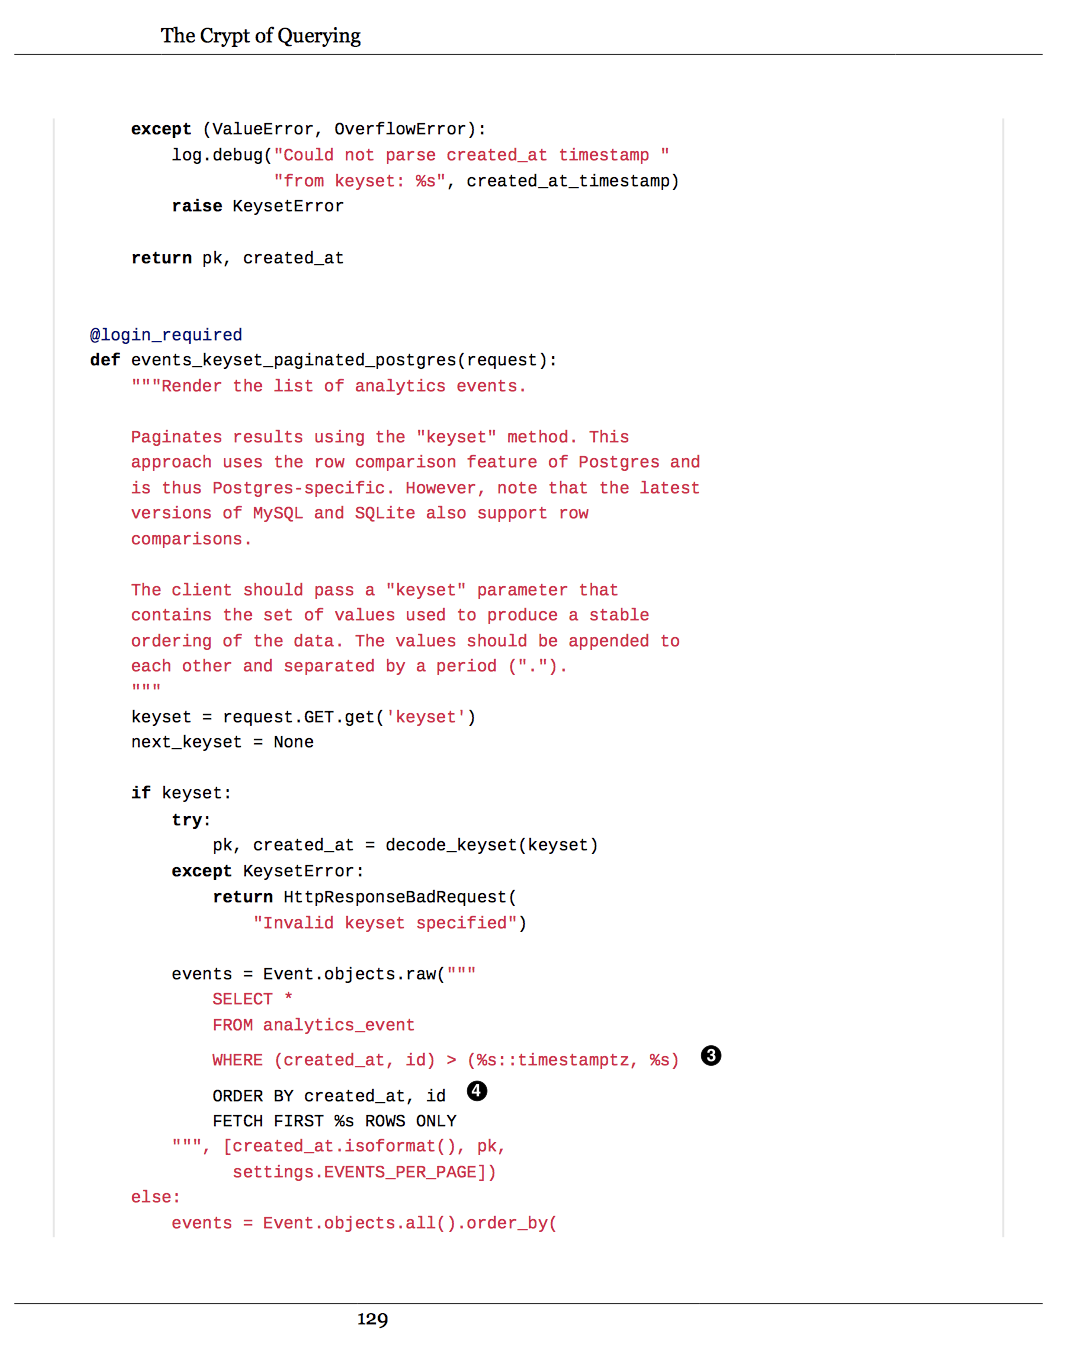 A sample of code from the book